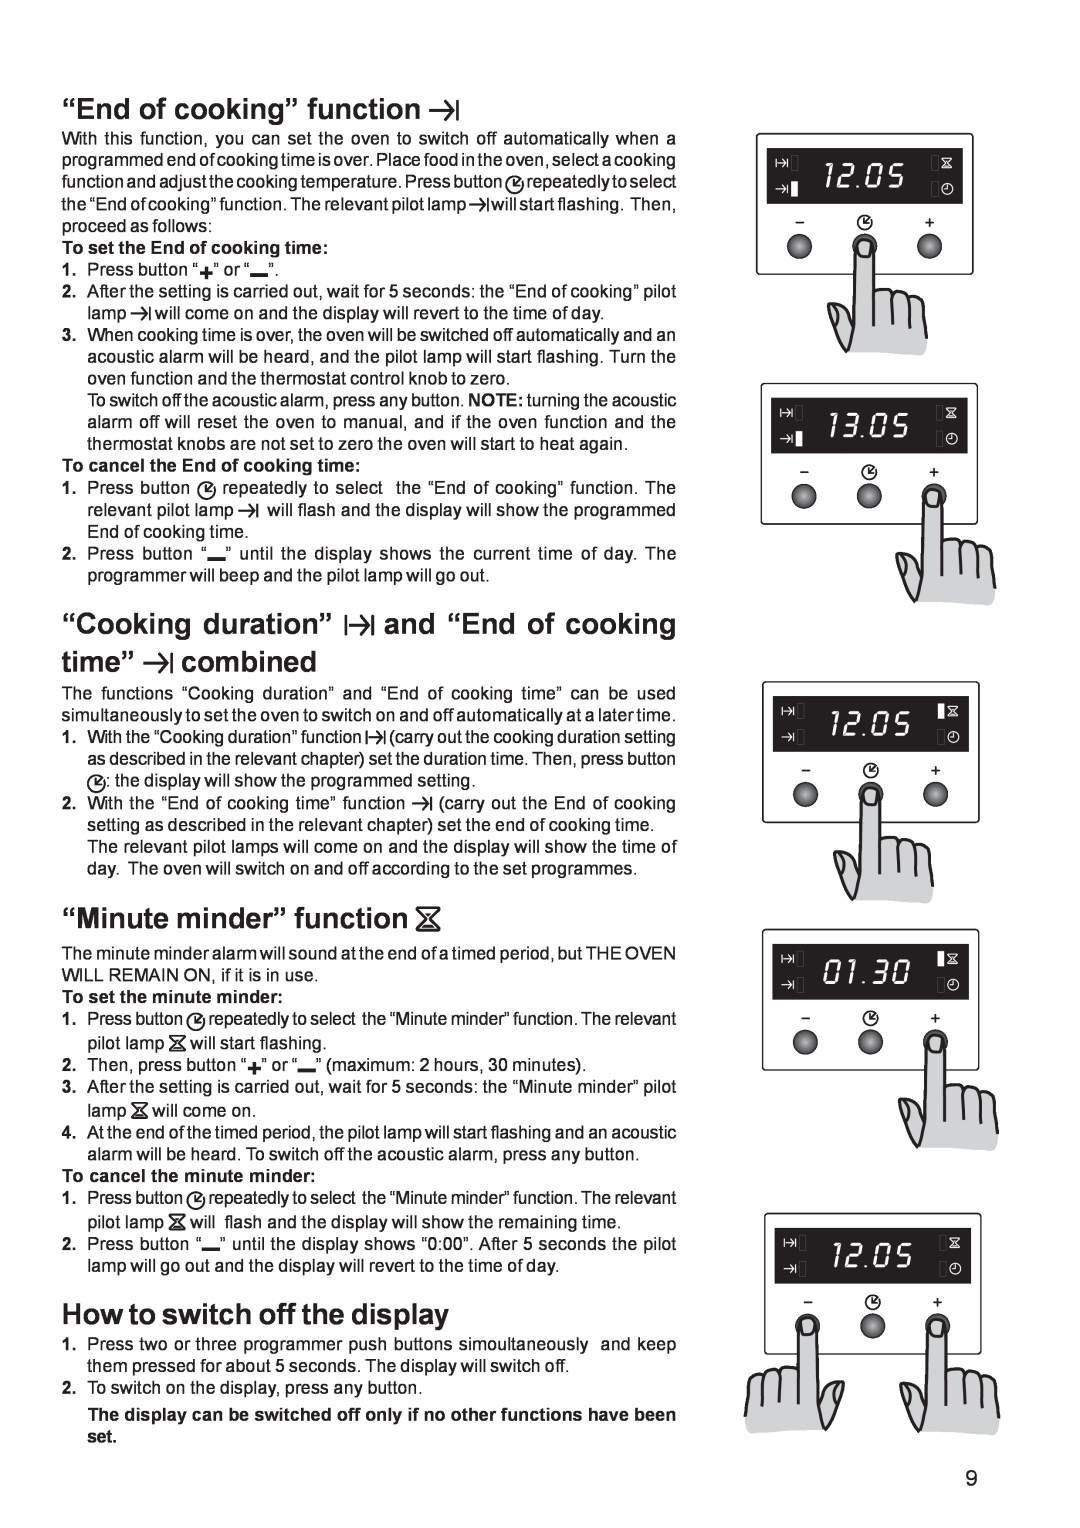 Zanussi ZBF 569 manual “End of cooking” function, “Minute minder” function, How to switch off the display 